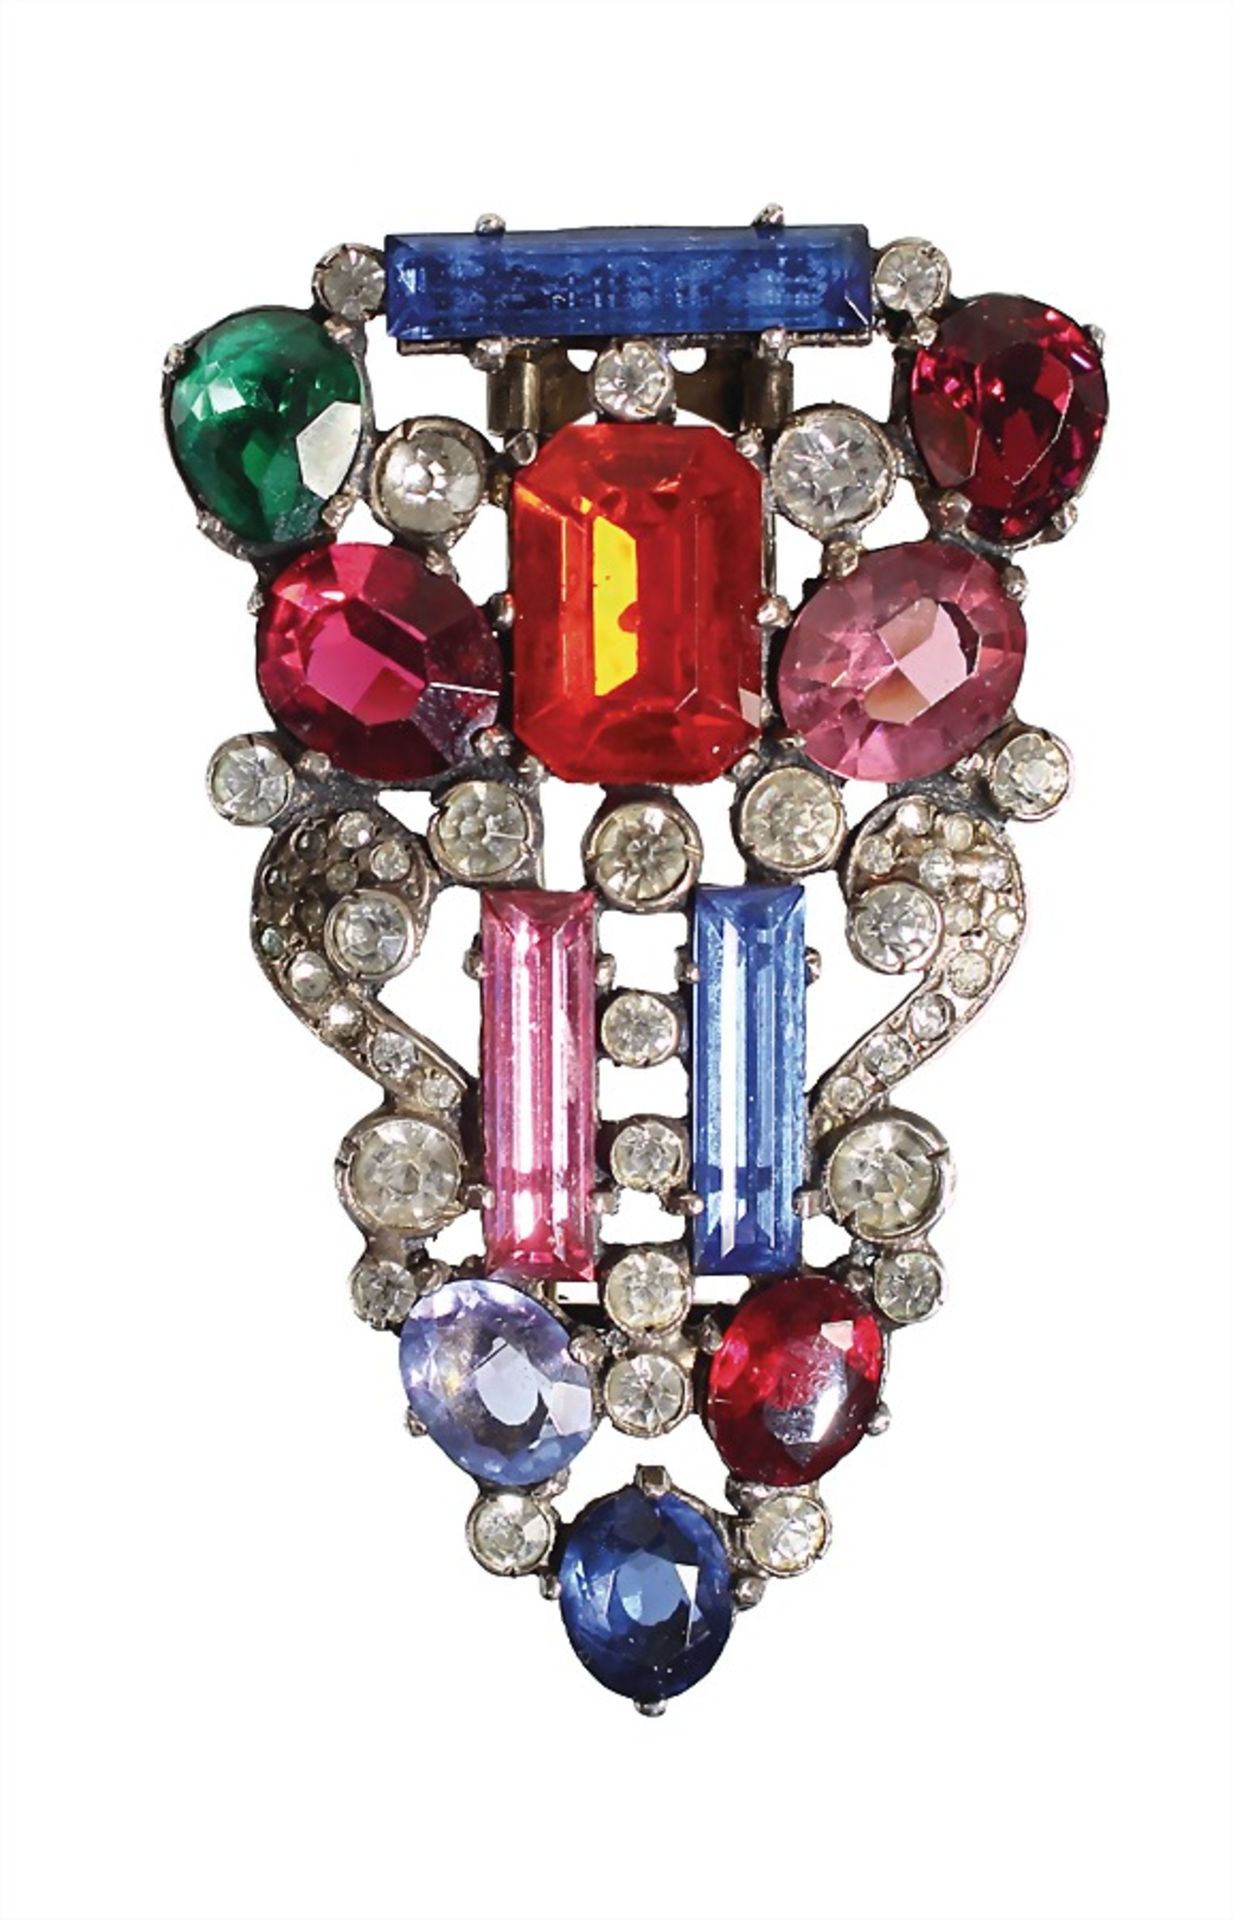 brooch, silver 925/000 (hallmarked: STERLING), unsigned, colorful rhinestones with mainly red,